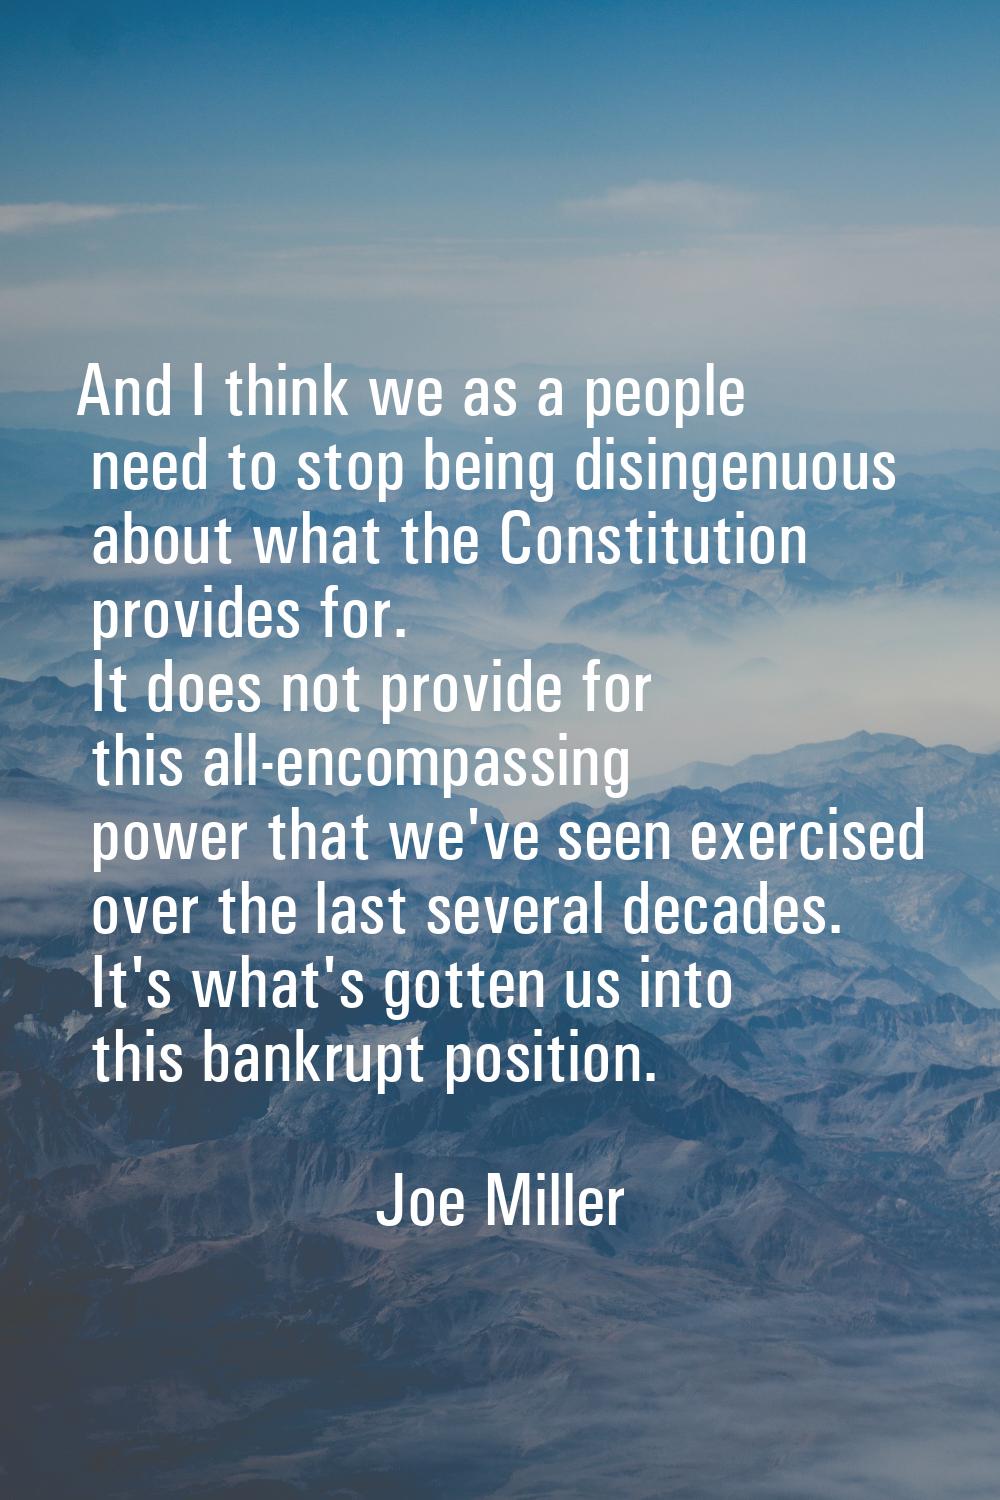 And I think we as a people need to stop being disingenuous about what the Constitution provides for